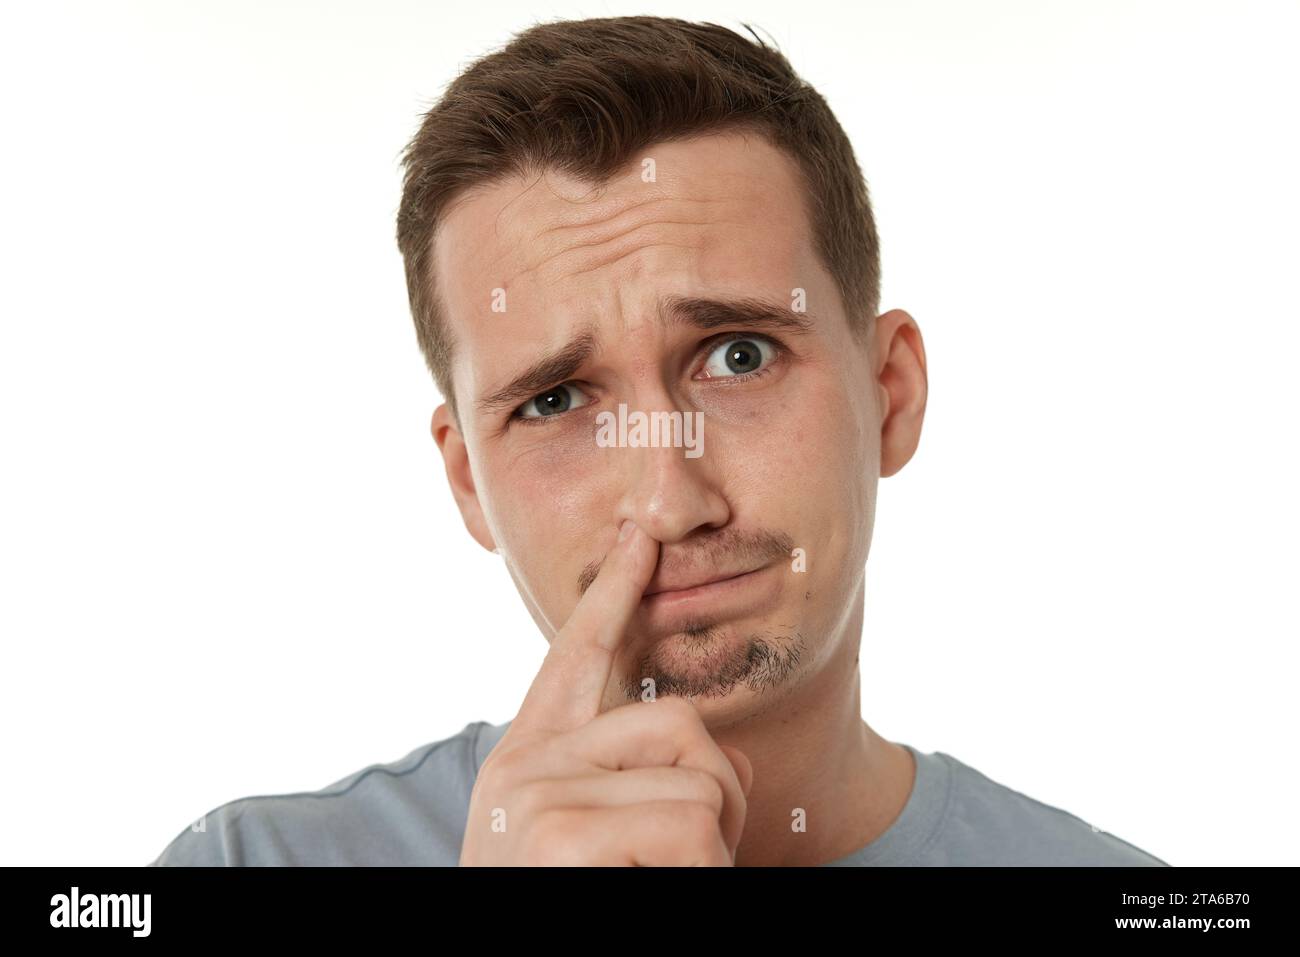 3,292 Nose Picking Images, Stock Photos, 3D objects, & Vectors